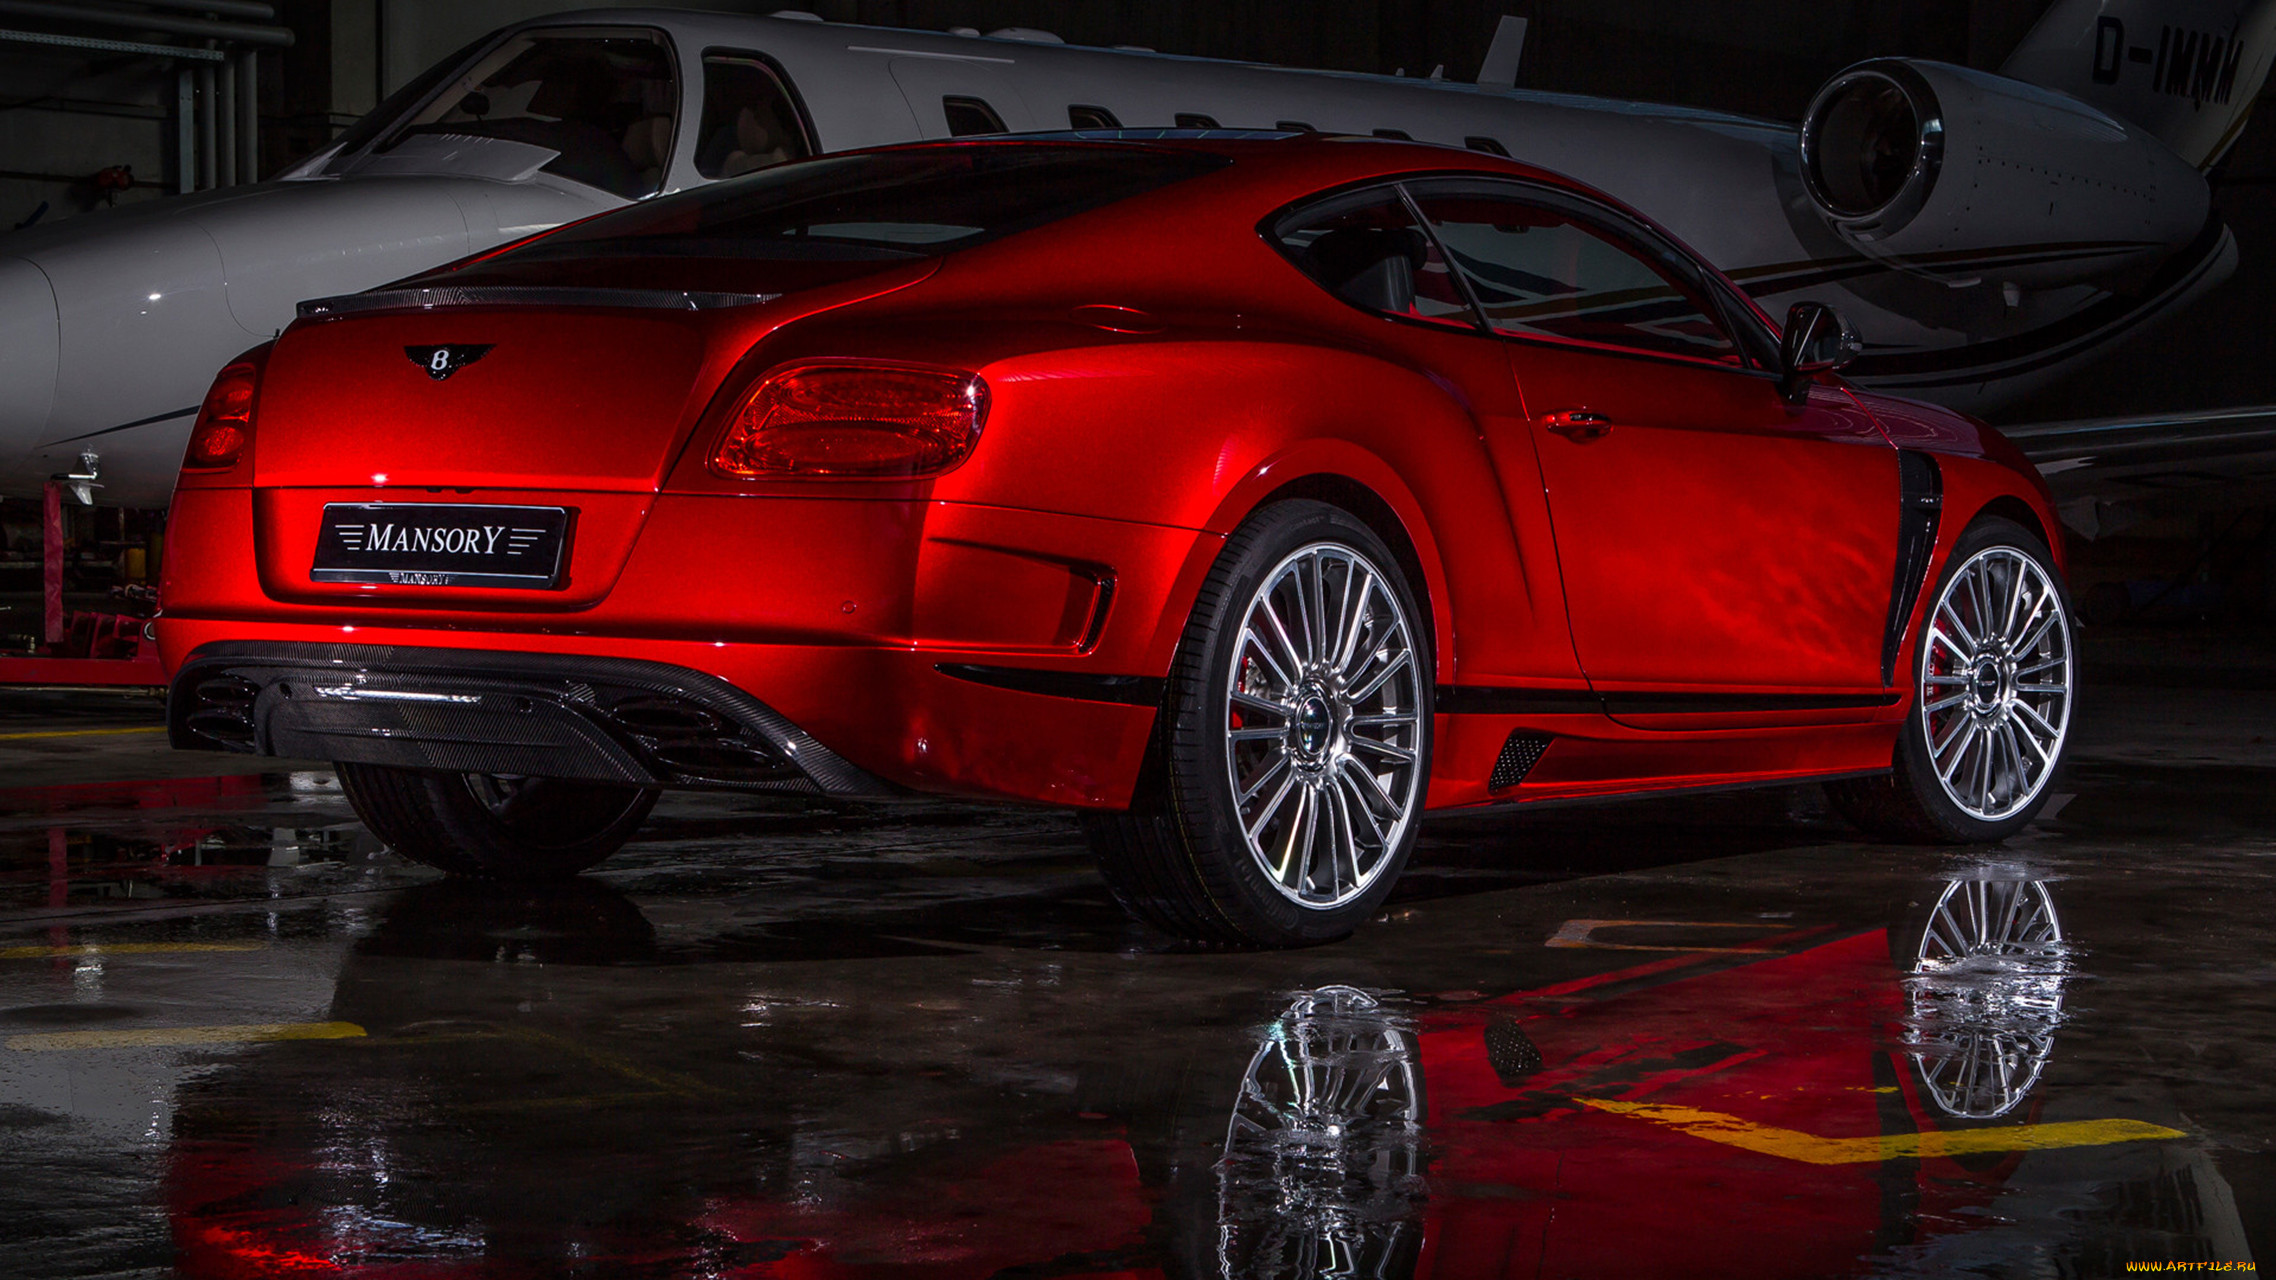 mansory sanguis based on bentley continental gt 2013, , bentley, mansory, sanguis, based, continental, gt, 2013